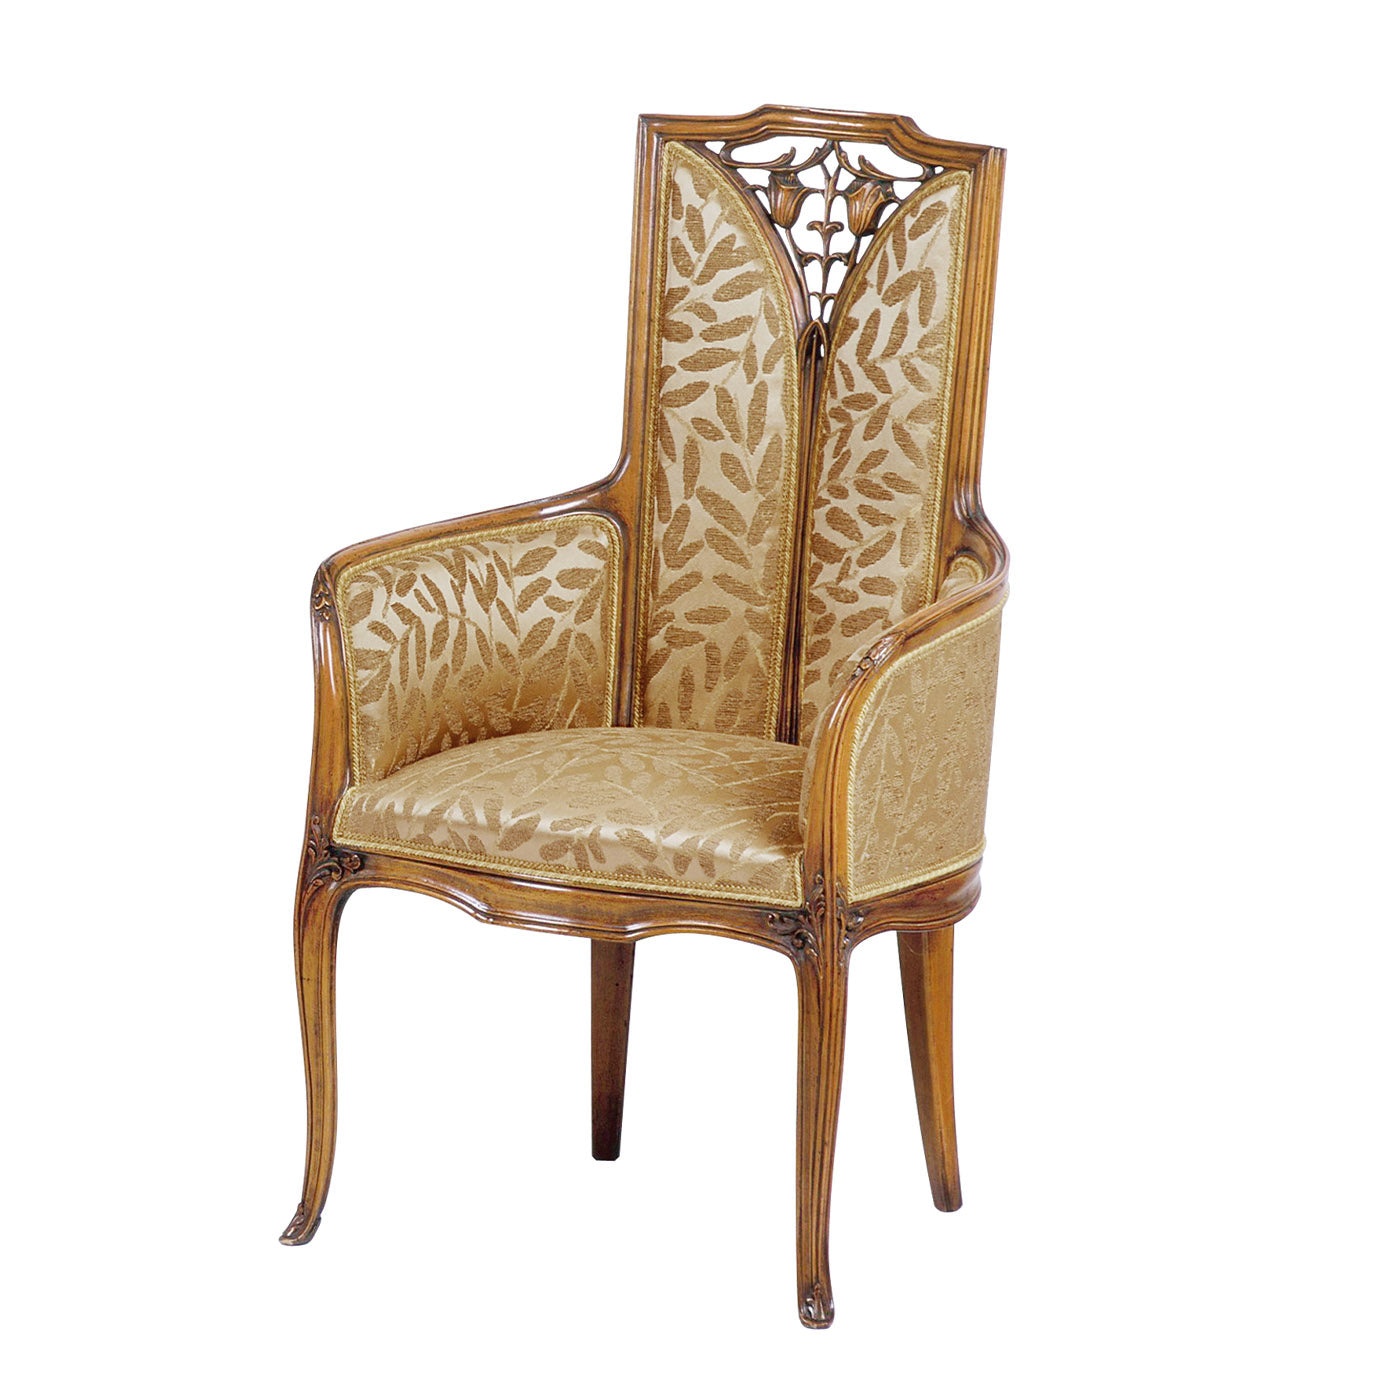 French Liberty Gold Armchair by Louis Majorelle - Alternative view 1